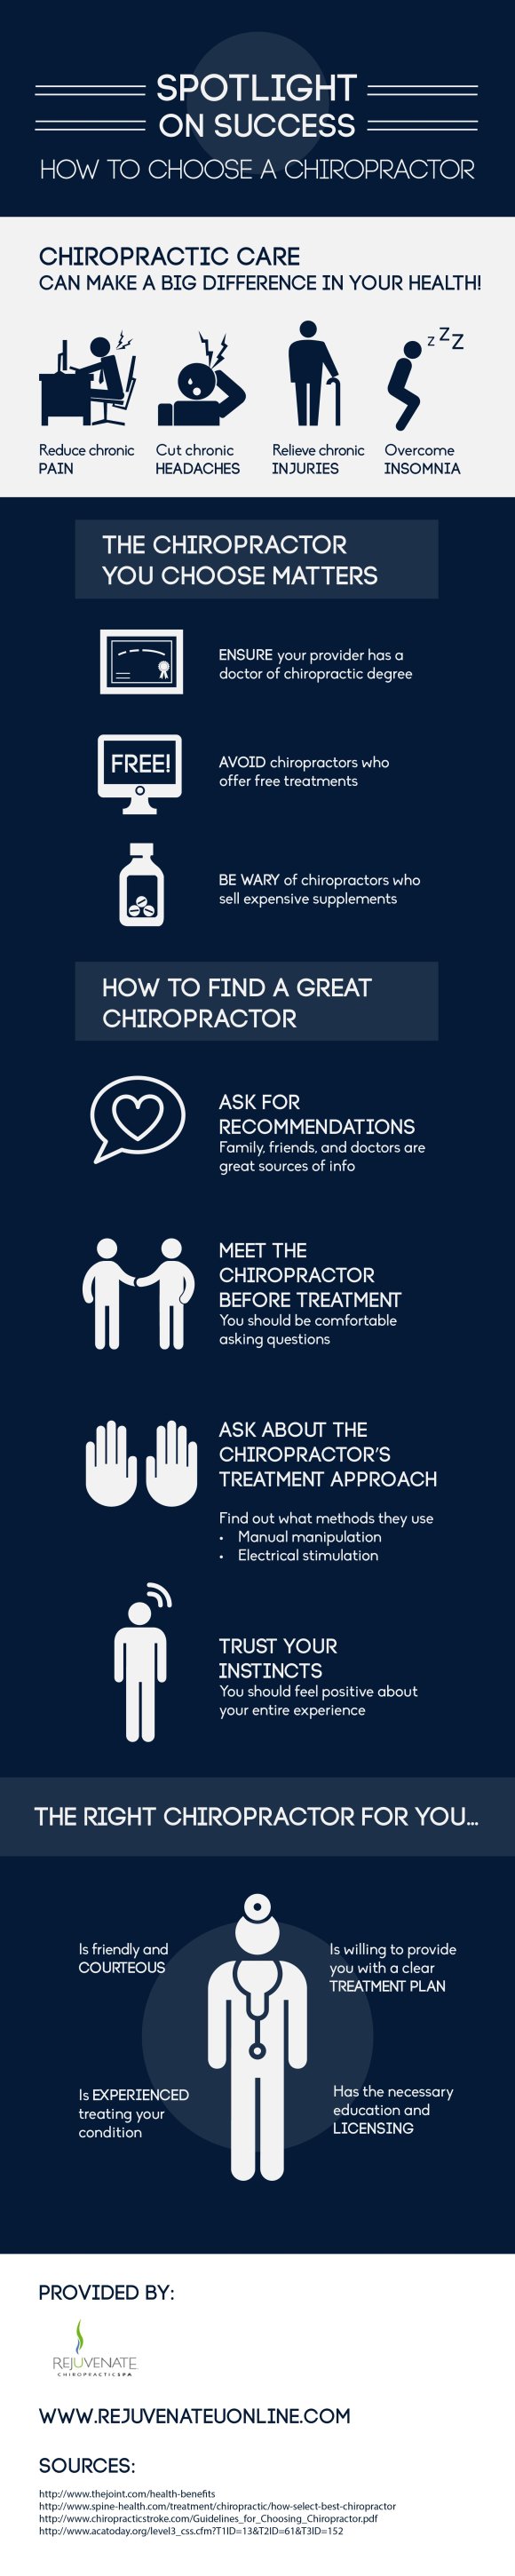 How to choose a chiropractor